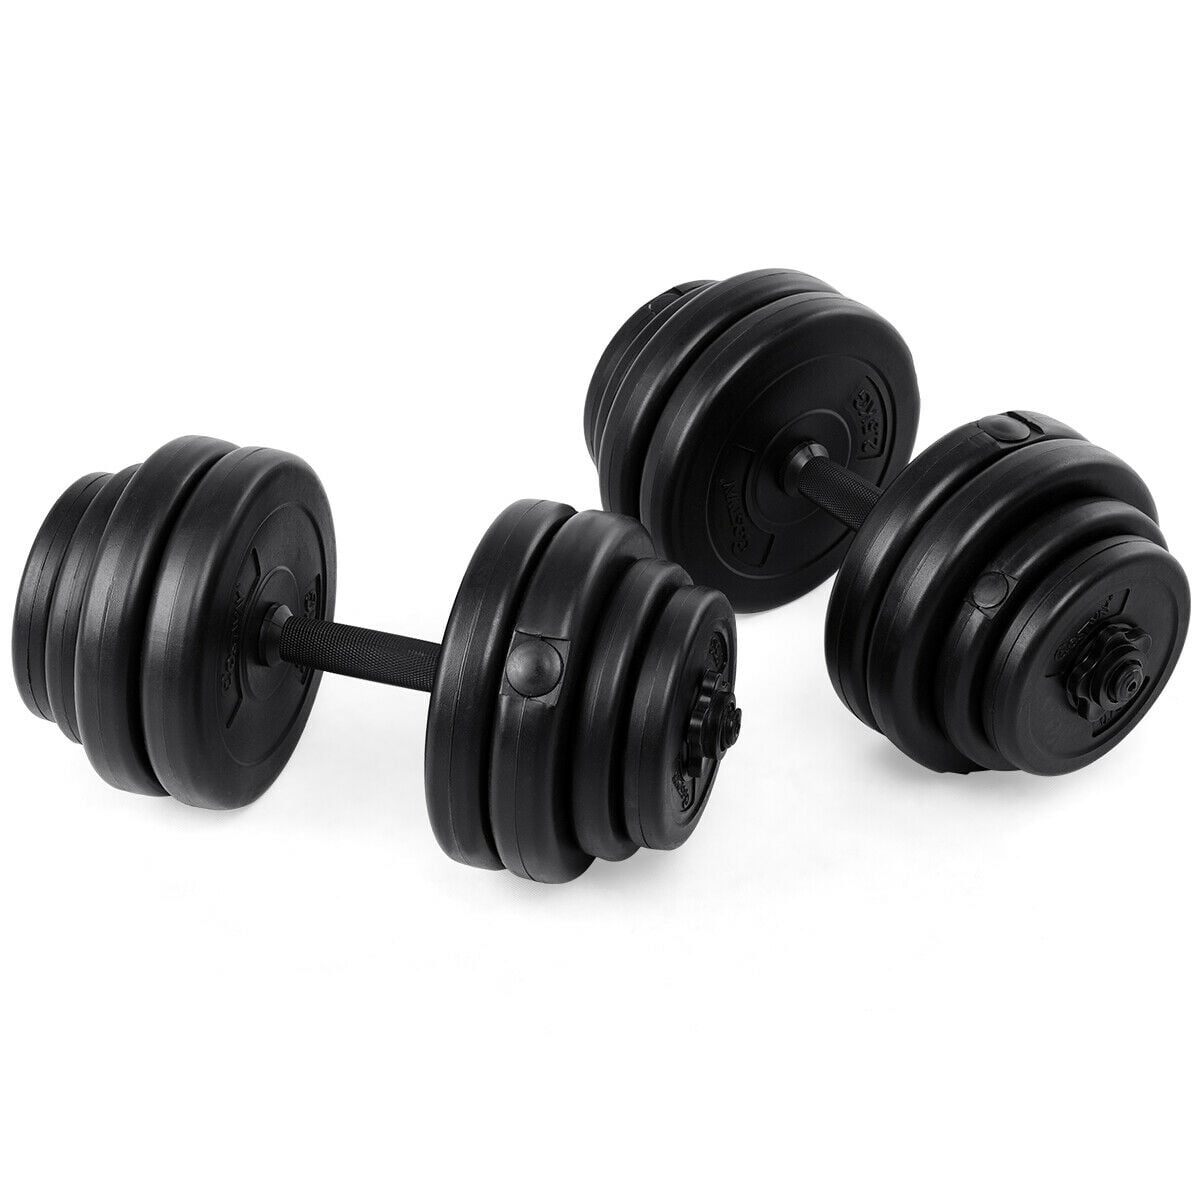 Totall 66 LB Weight Dumbbell Set Cap Gym Barbell Plates Body Workout Black New 